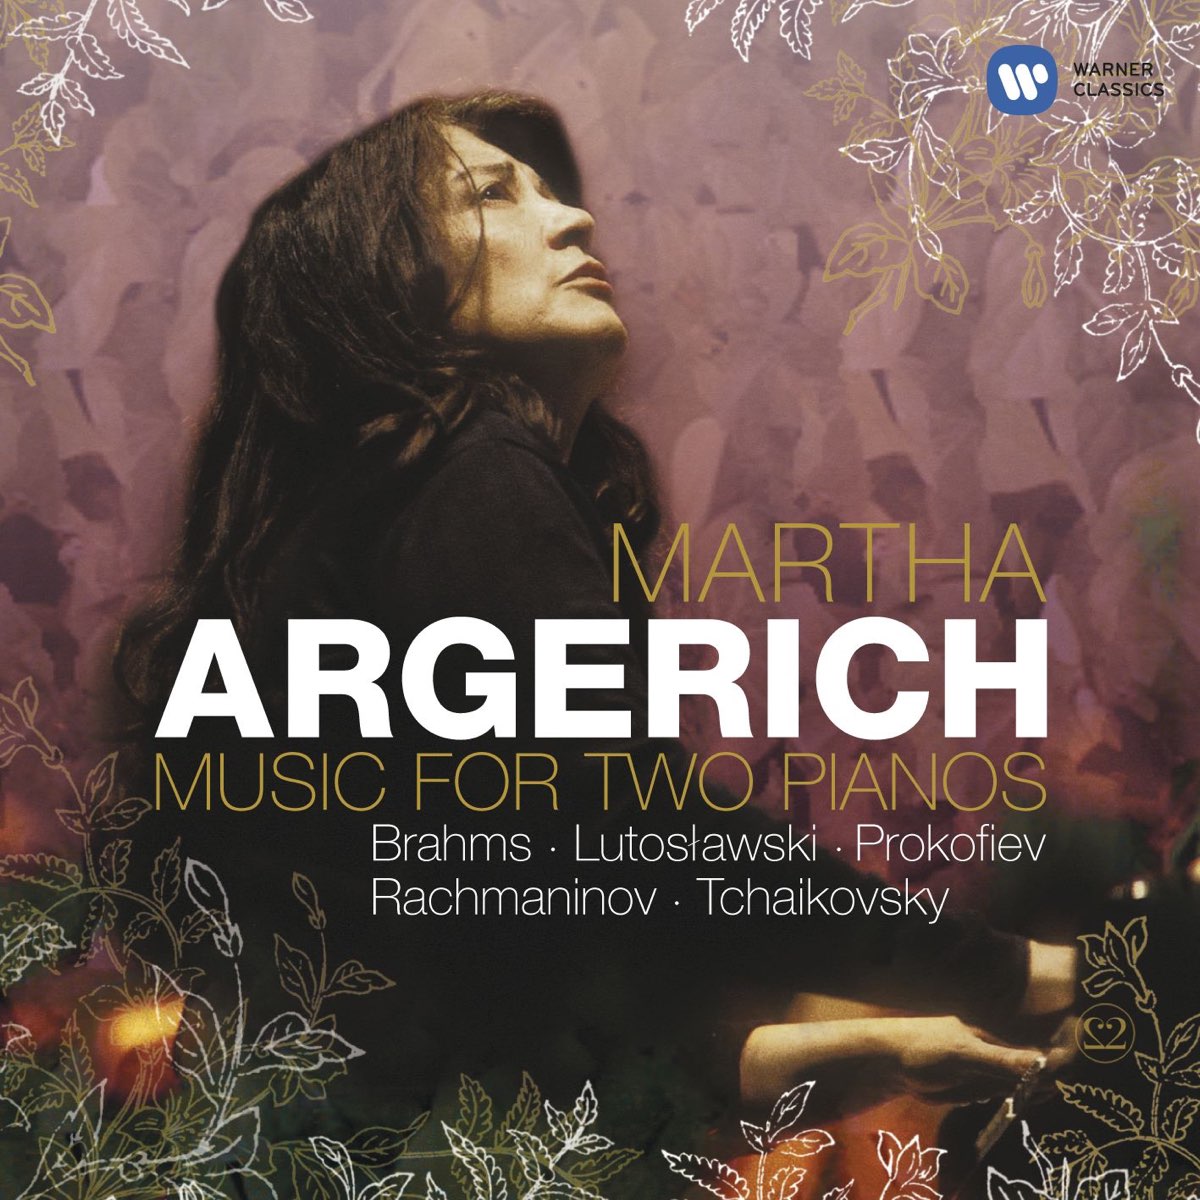 Two pianos. Martha Argerich Plays Tchaikovsky and Prokofiev.